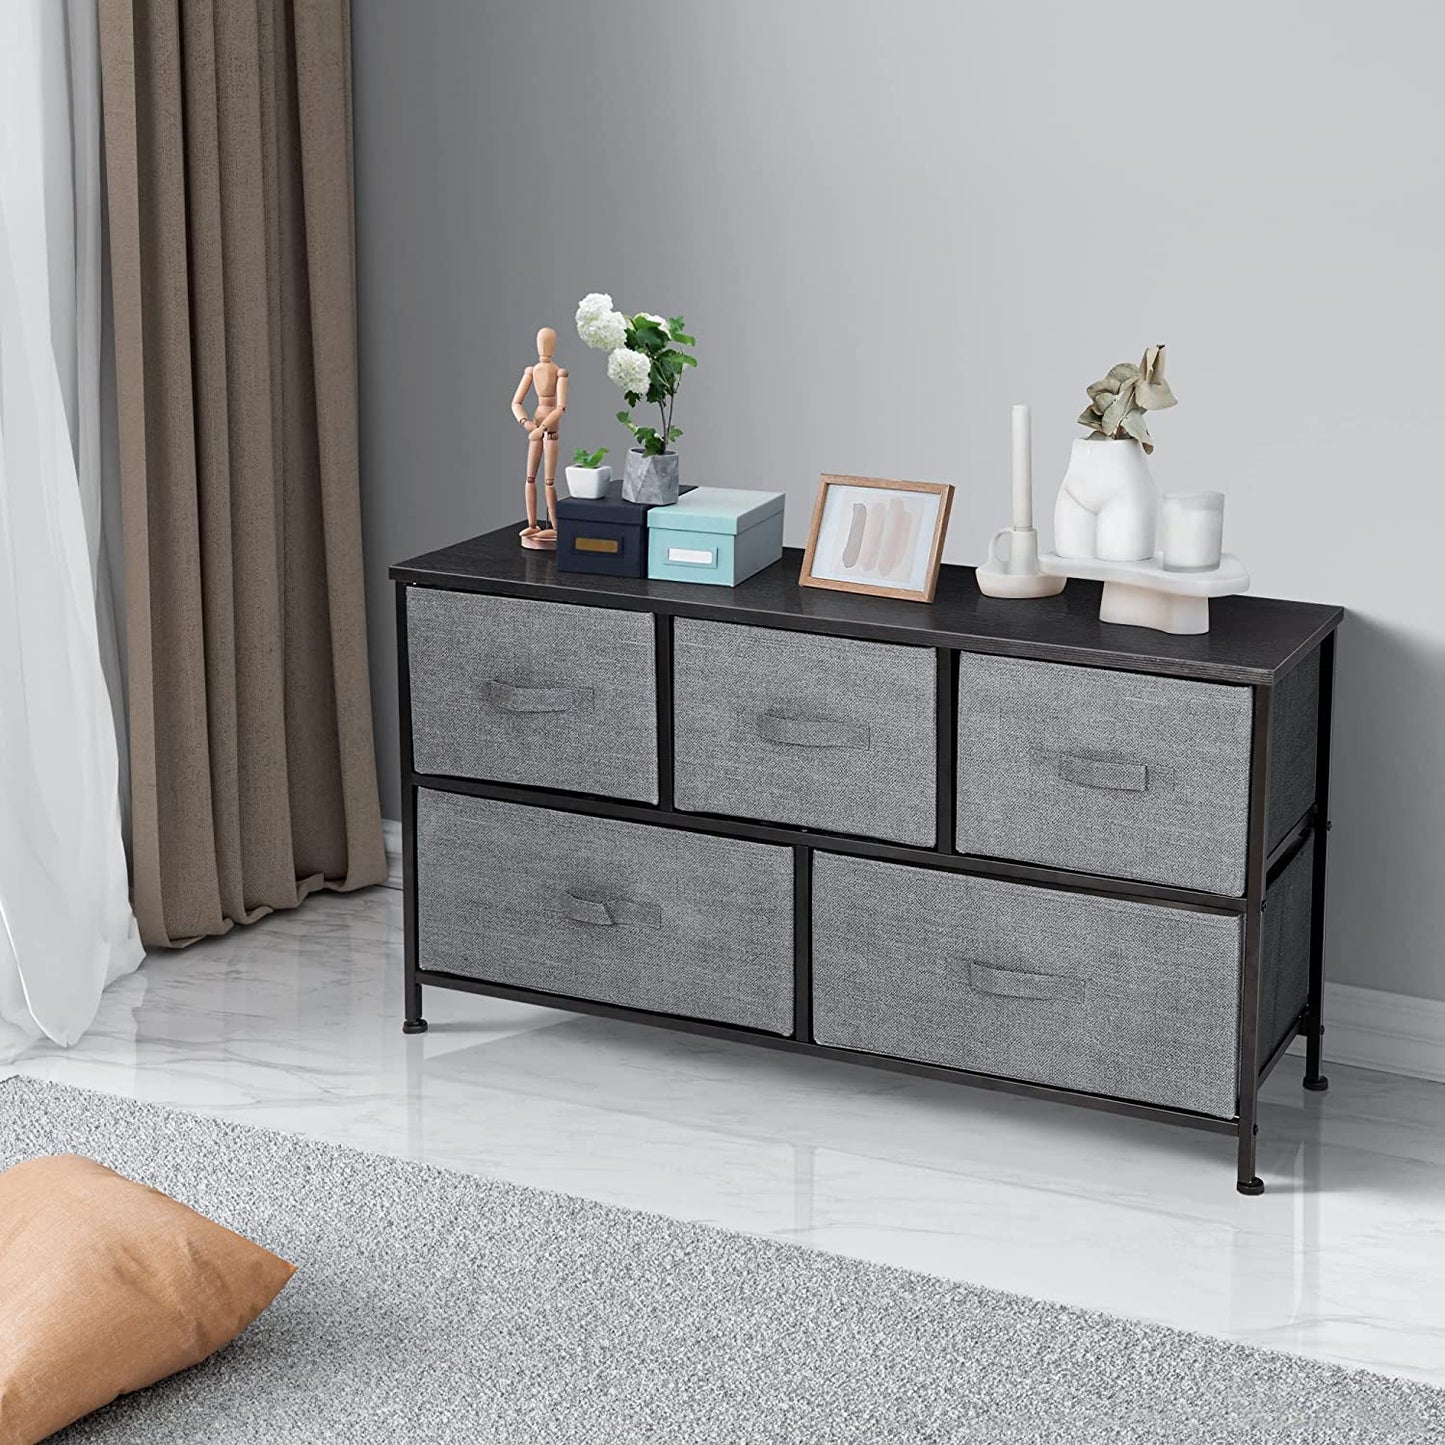 Extra Wide Dresser Storage Tower - Storage Tower Unit for Bedroom, Hallway, Closet, Office Organization - Steel Frame, Wood Top, Easy Pull Fabric Bins - 5 Drawers